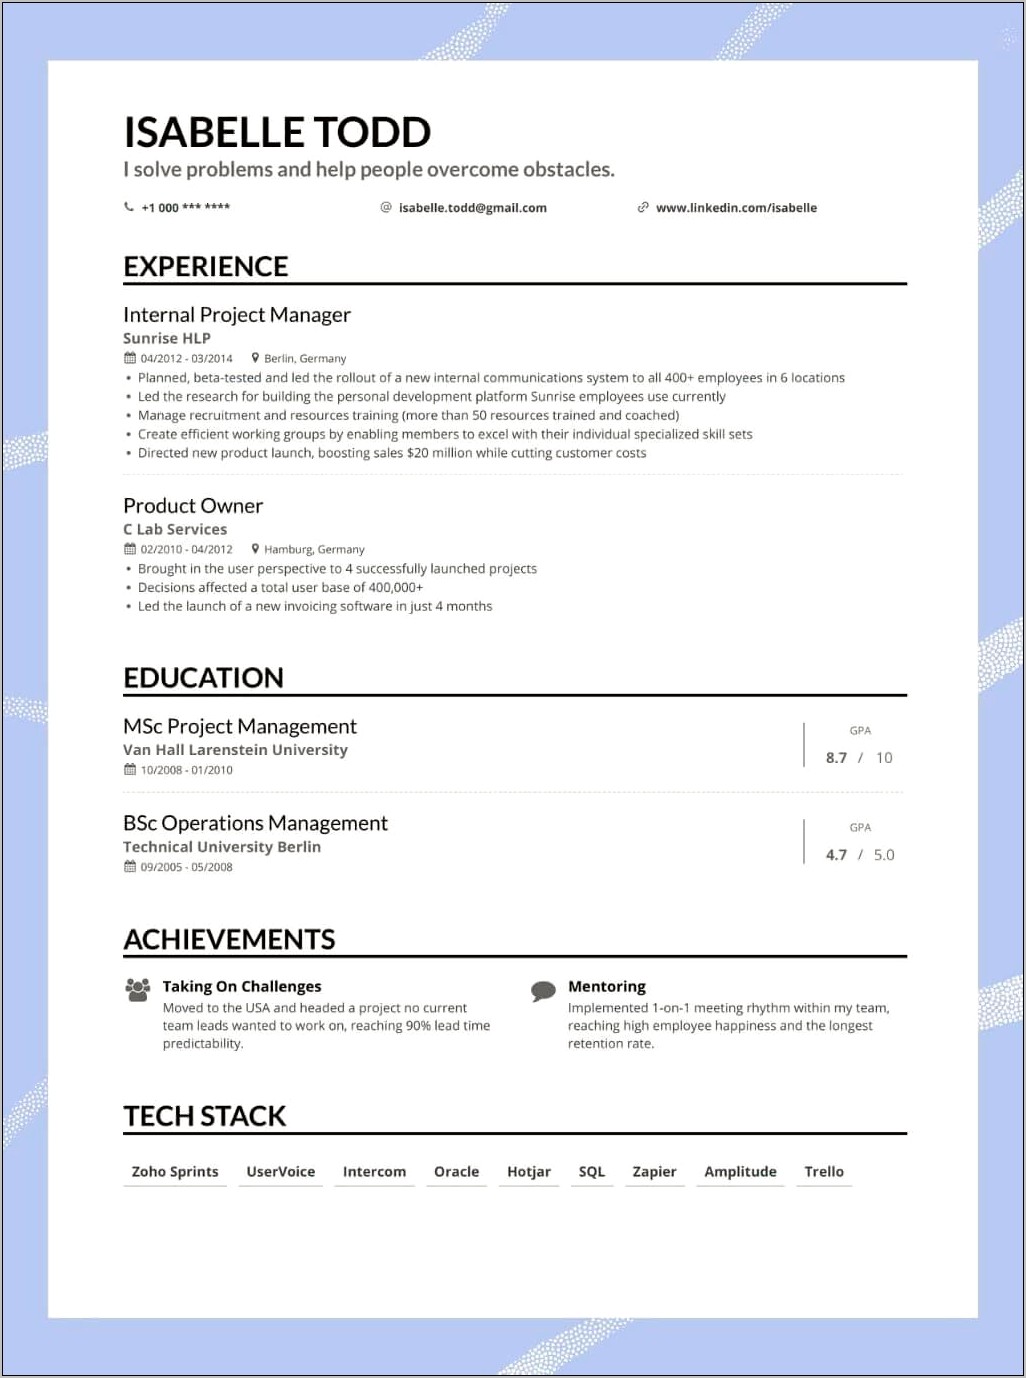 Resume Putting Most Recent Employment First